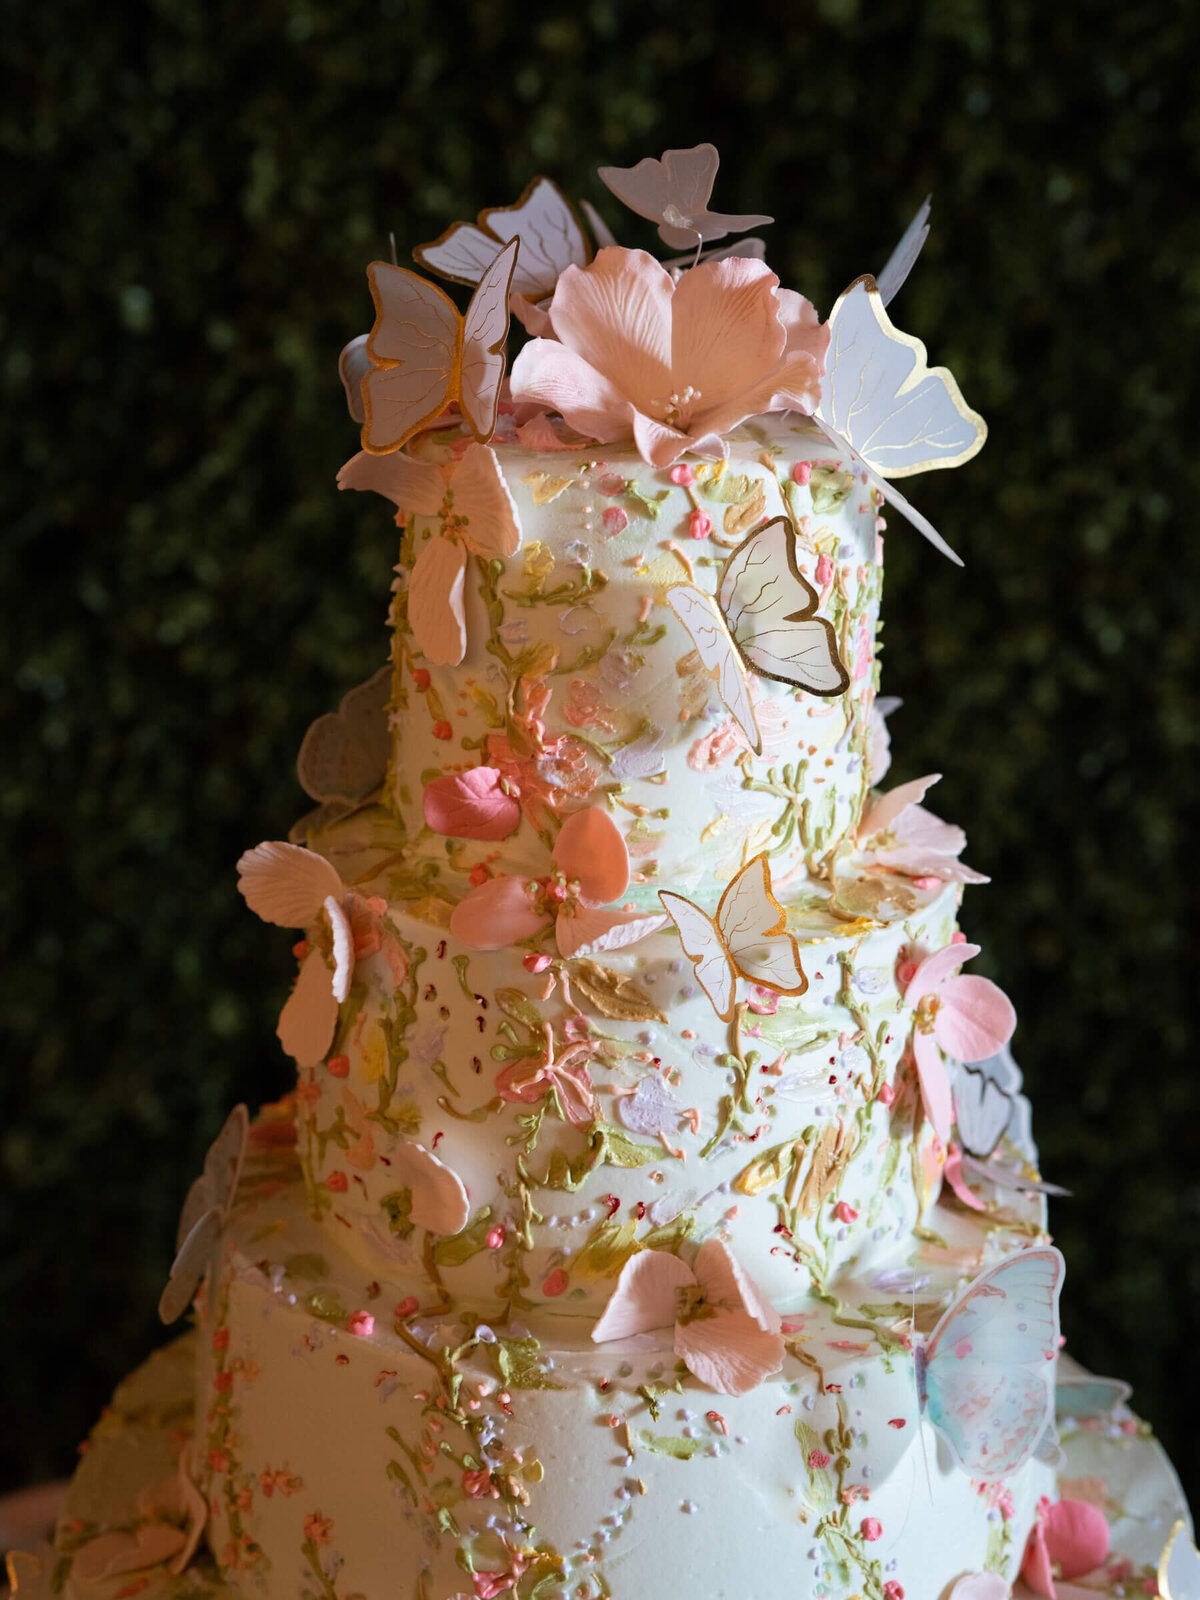 5-tier pastel sage green wedding cake covered in sugar butterflies with gold edged wings.